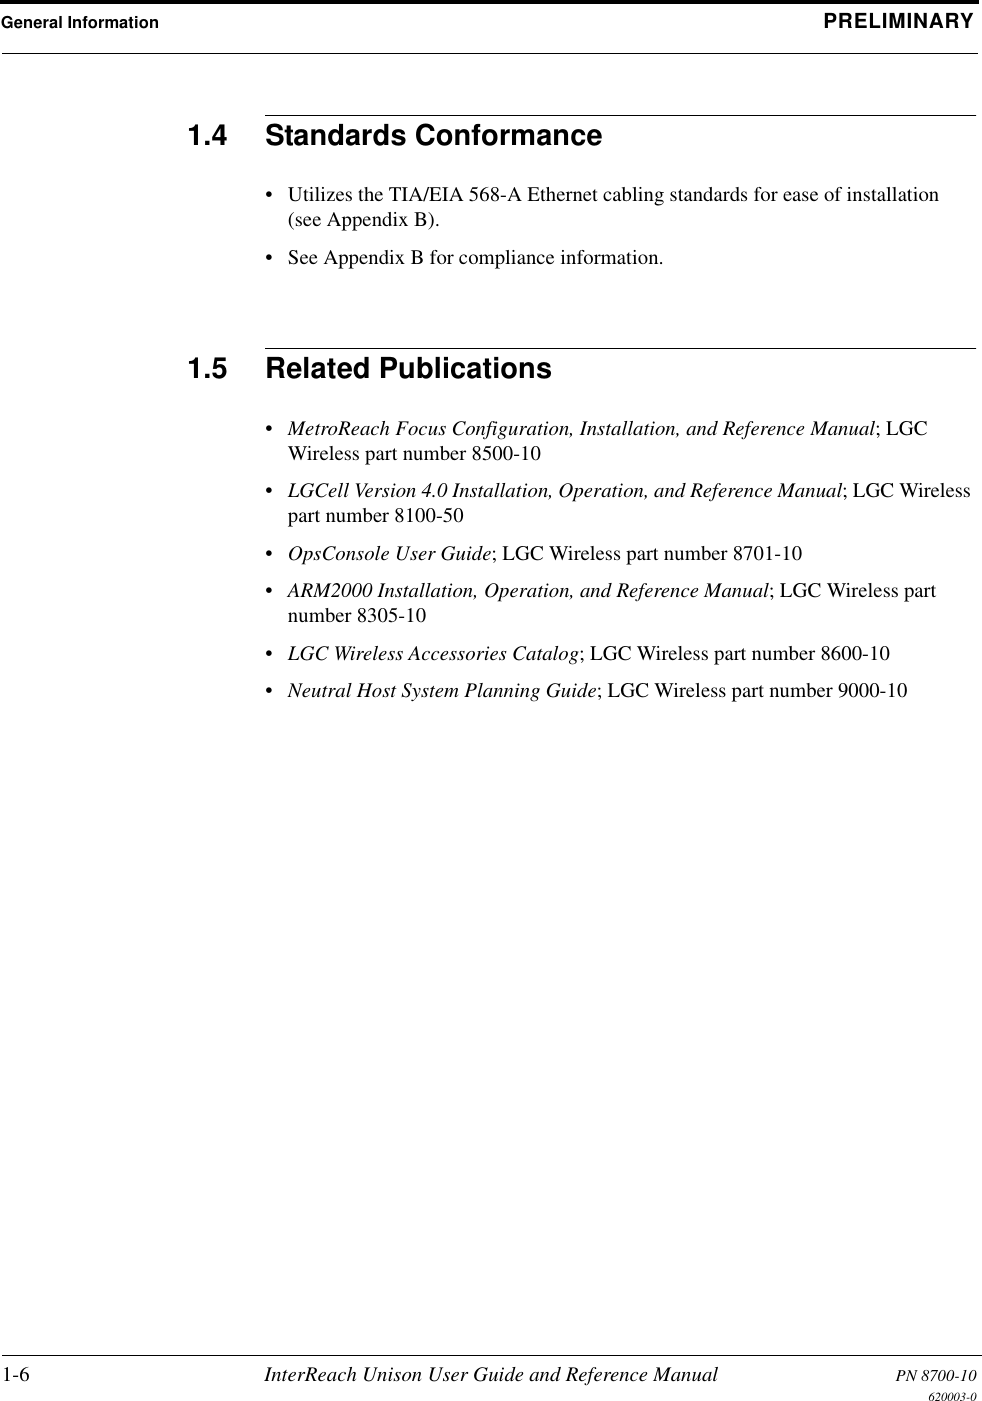 General Information PRELIMINARY1-6 InterReach Unison User Guide and Reference Manual PN 8700-10620003-01.4 Standards Conformance• Utilizes the TIA/EIA 568-A Ethernet cabling standards for ease of installation (see Appendix B).• See Appendix B for compliance information.1.5 Related Publications•MetroReach Focus Configuration, Installation, and Reference Manual; LGC Wireless part number 8500-10•LGCell Version 4.0 Installation, Operation, and Reference Manual; LGC Wireless part number 8100-50•OpsConsole User Guide; LGC Wireless part number 8701-10•ARM2000 Installation, Operation, and Reference Manual; LGC Wireless part number 8305-10•LGC Wireless Accessories Catalog; LGC Wireless part number 8600-10•Neutral Host System Planning Guide; LGC Wireless part number 9000-10